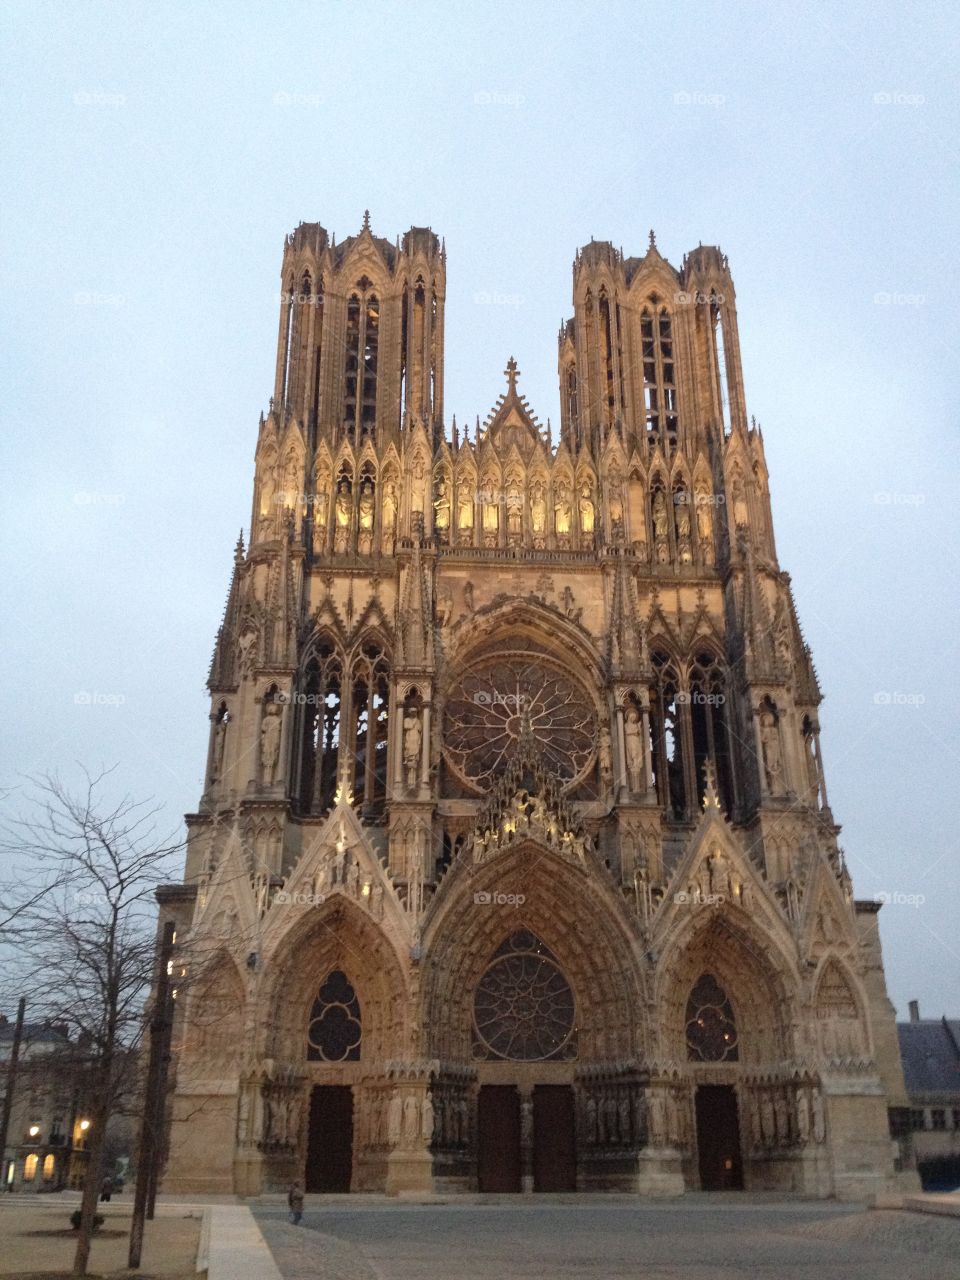 The REAL Notre Dame. Most people think the original Notre Dame is in Paris but it's actually just a replica of this one in Reims, France. 